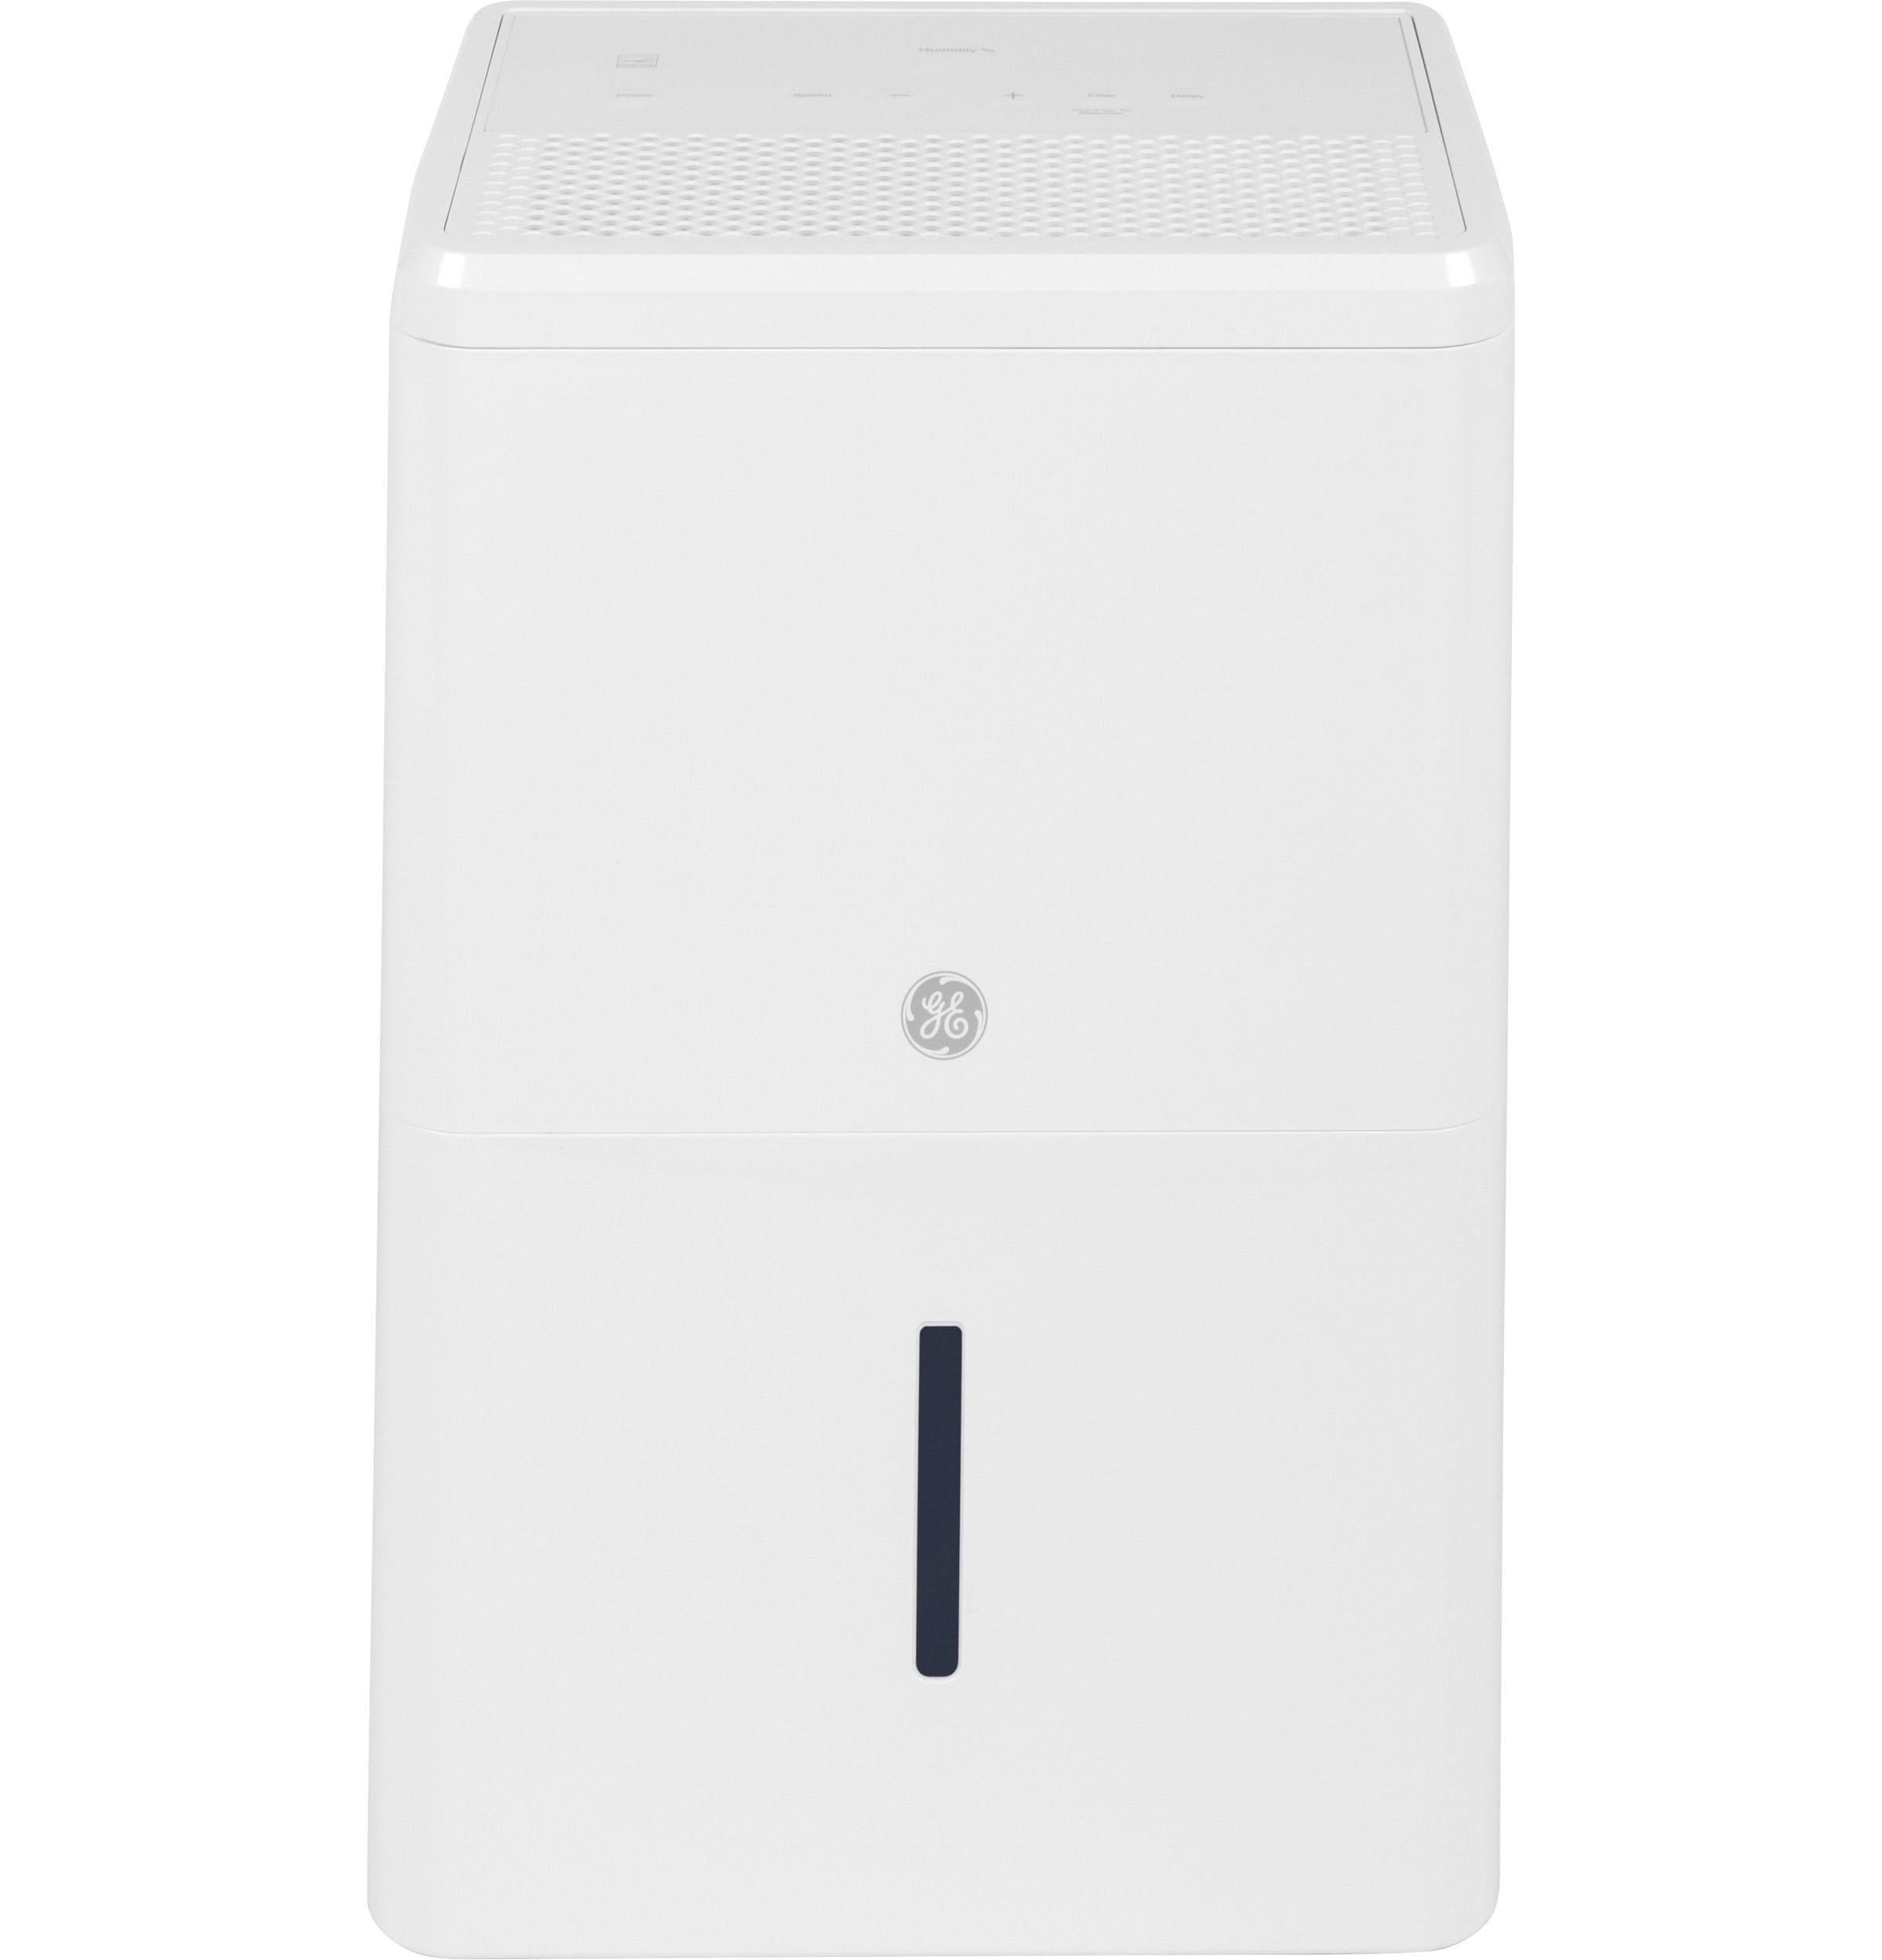 GE® ENERGY STAR® 22 Pint Portable Dehumidifier with Smart Dry for Damp